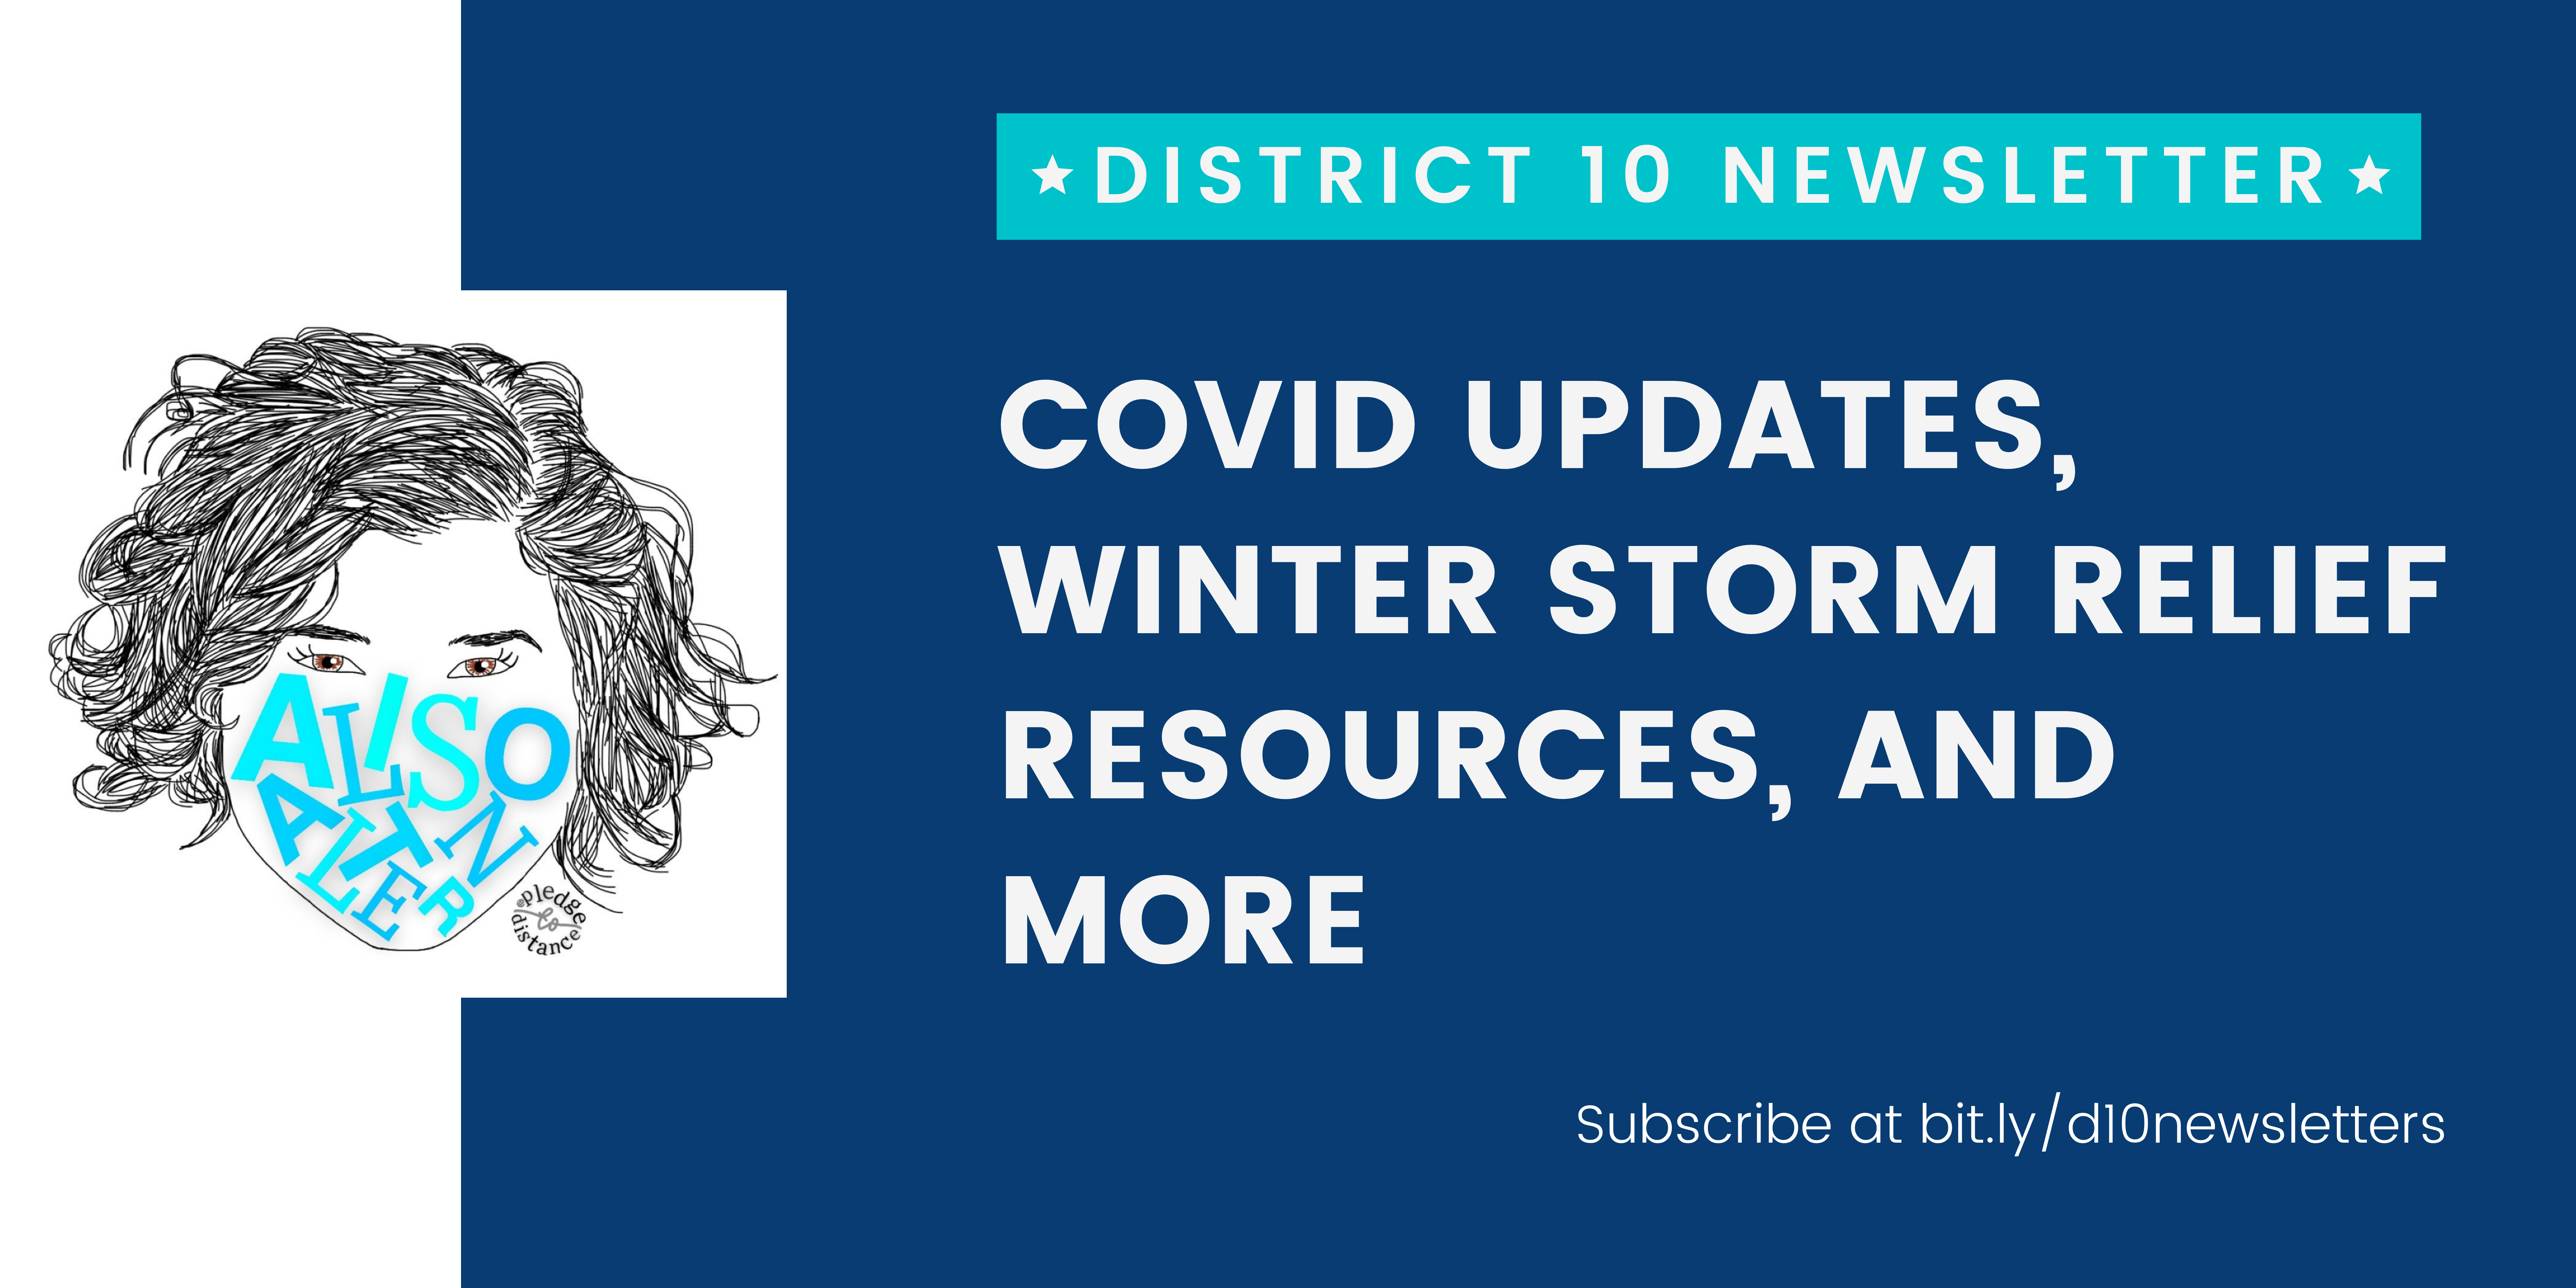 District 10 Newsletter; Council Action on Winter Storm Uri Relief and Recovery. Subscribe at bit.ly/d10newsletters